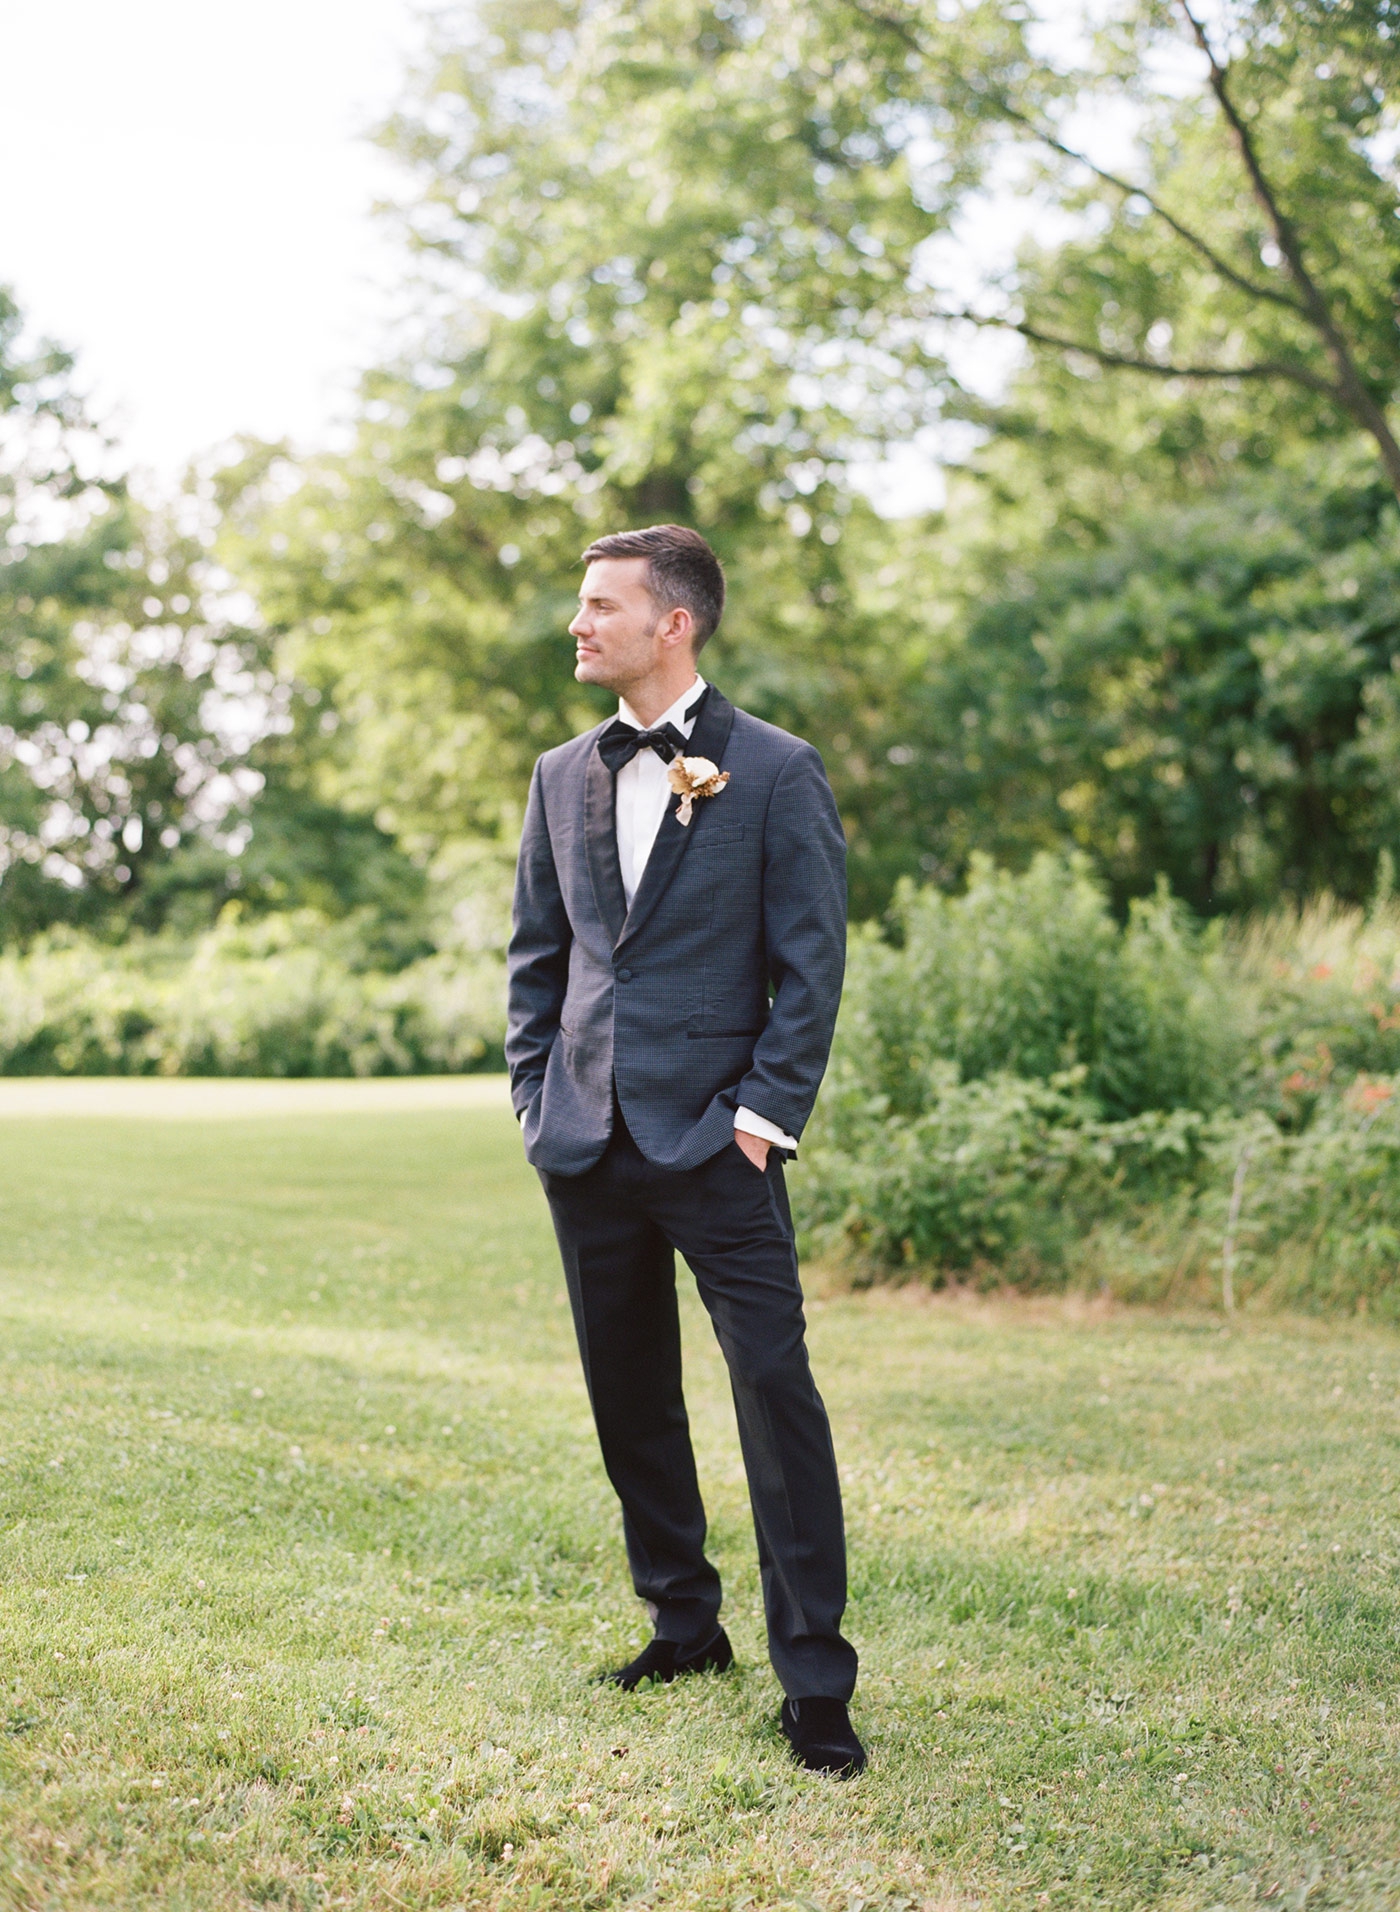 Intimate wedding ceremony at Reed Homestead in the Finger Lakes, New York